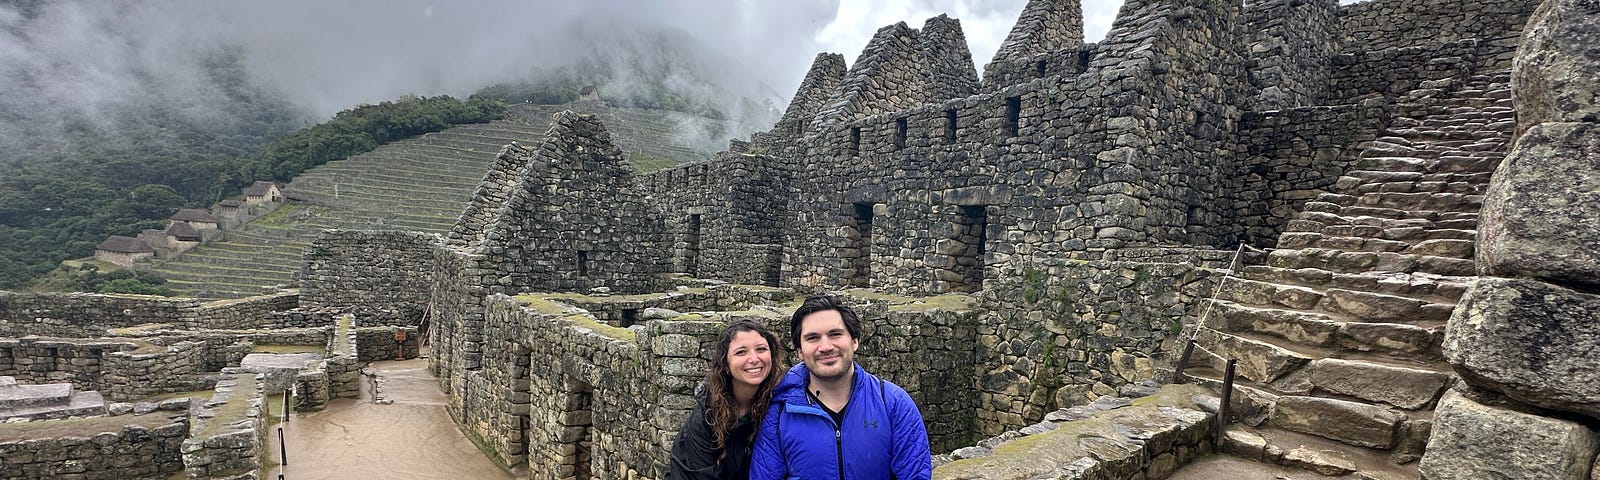 My partner and I among the ruins of the old residential houses in Machu Picchu. Not another person in sight.